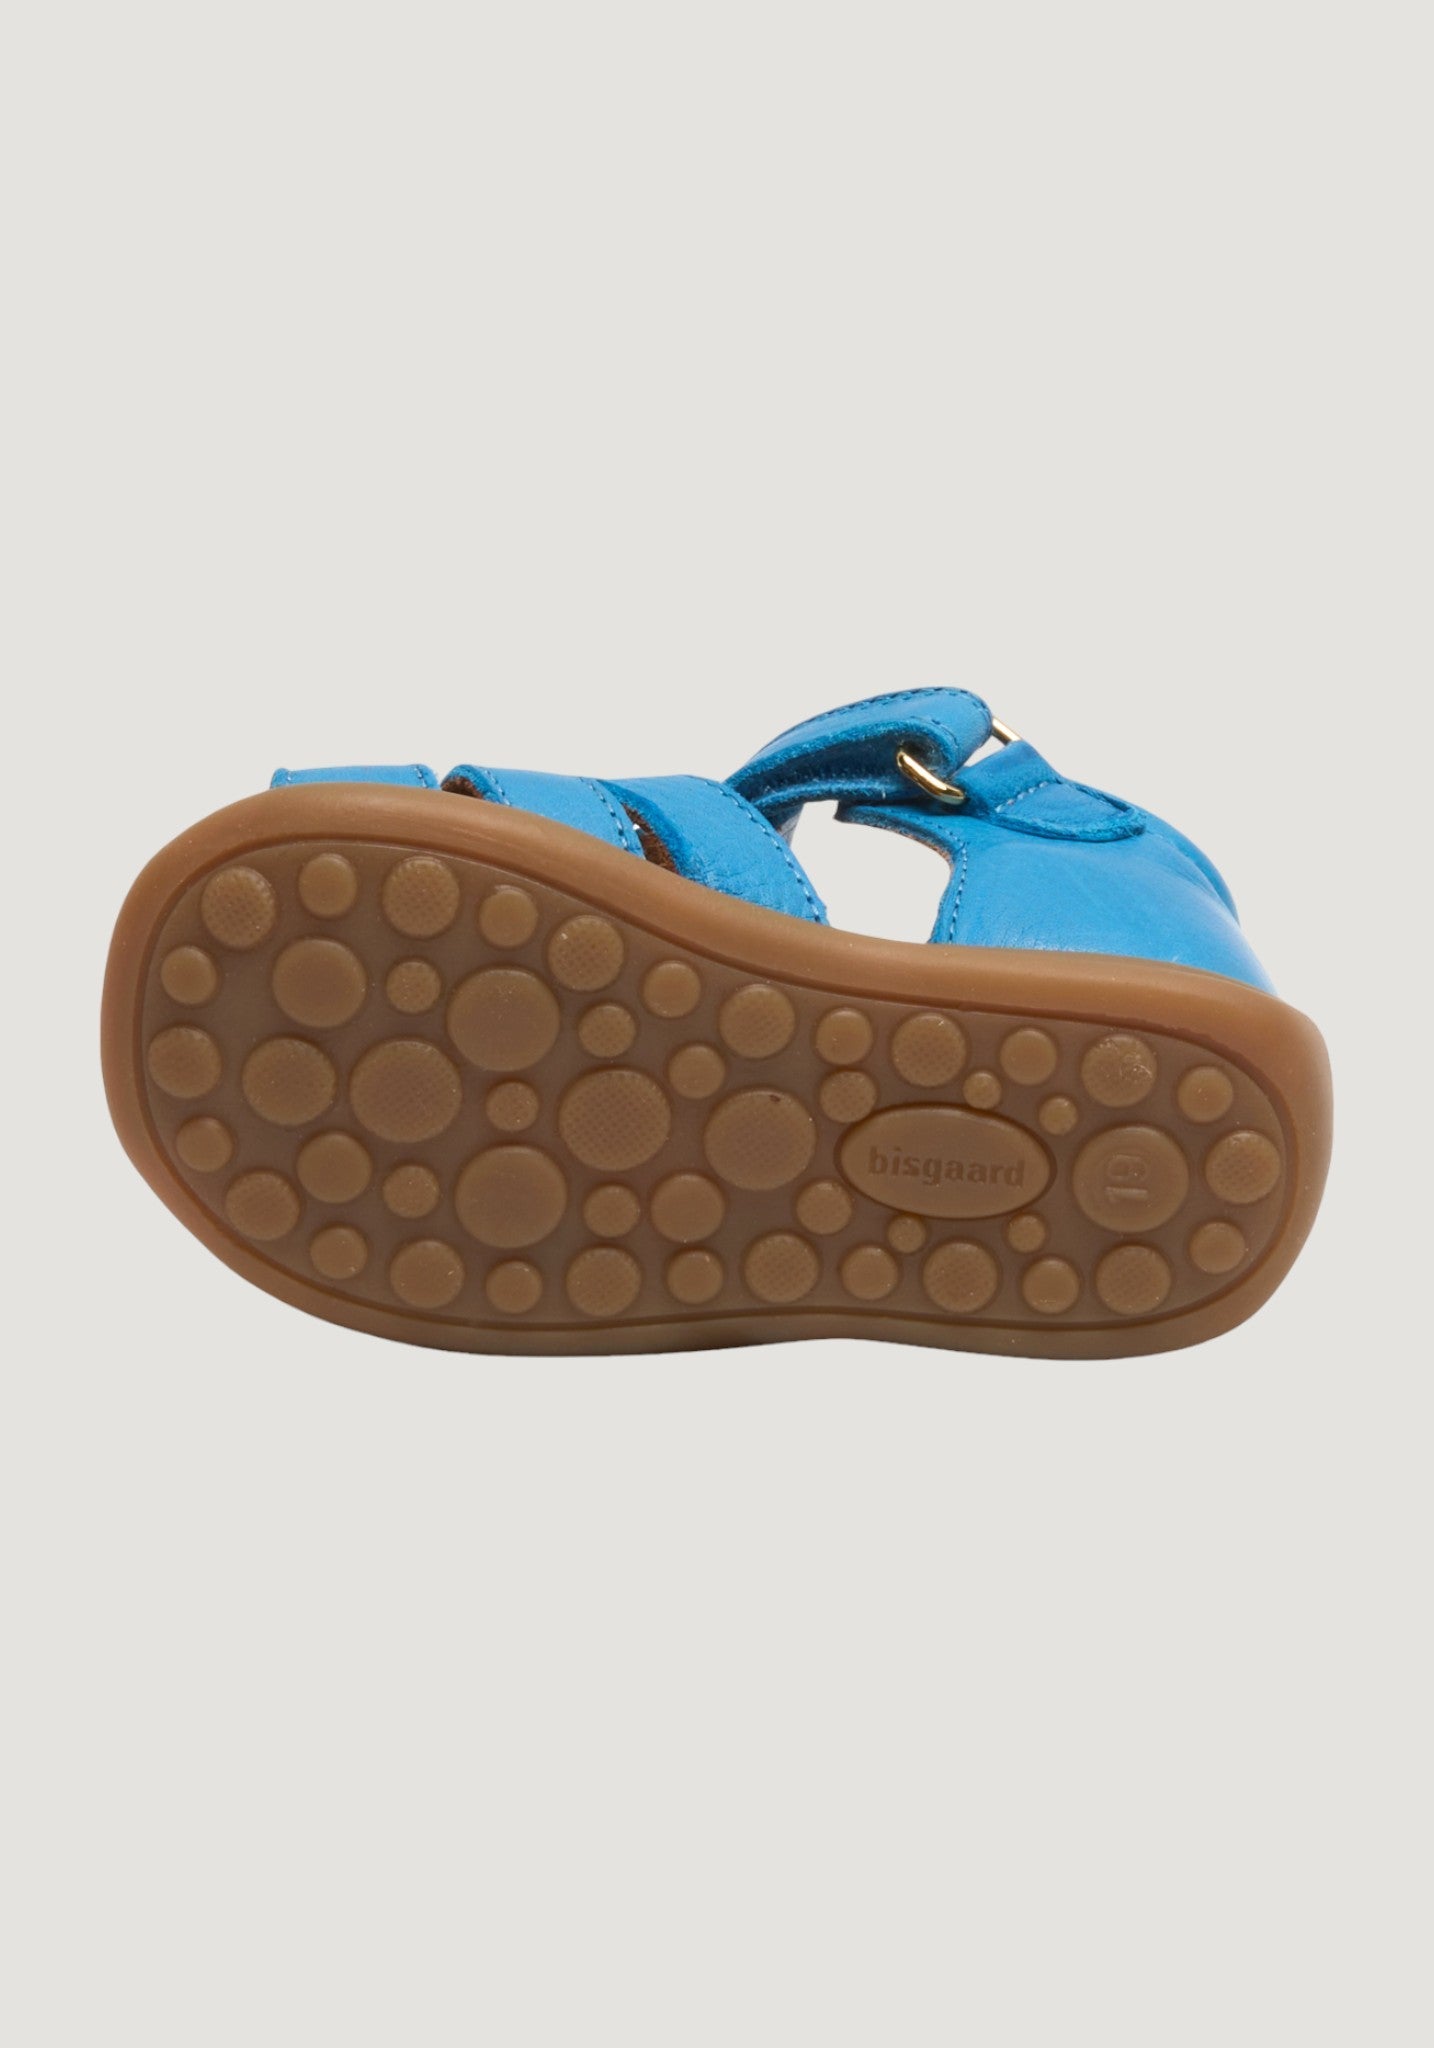 Sandale First Step piele - Carly Blue Bisgaard HipHip.ro